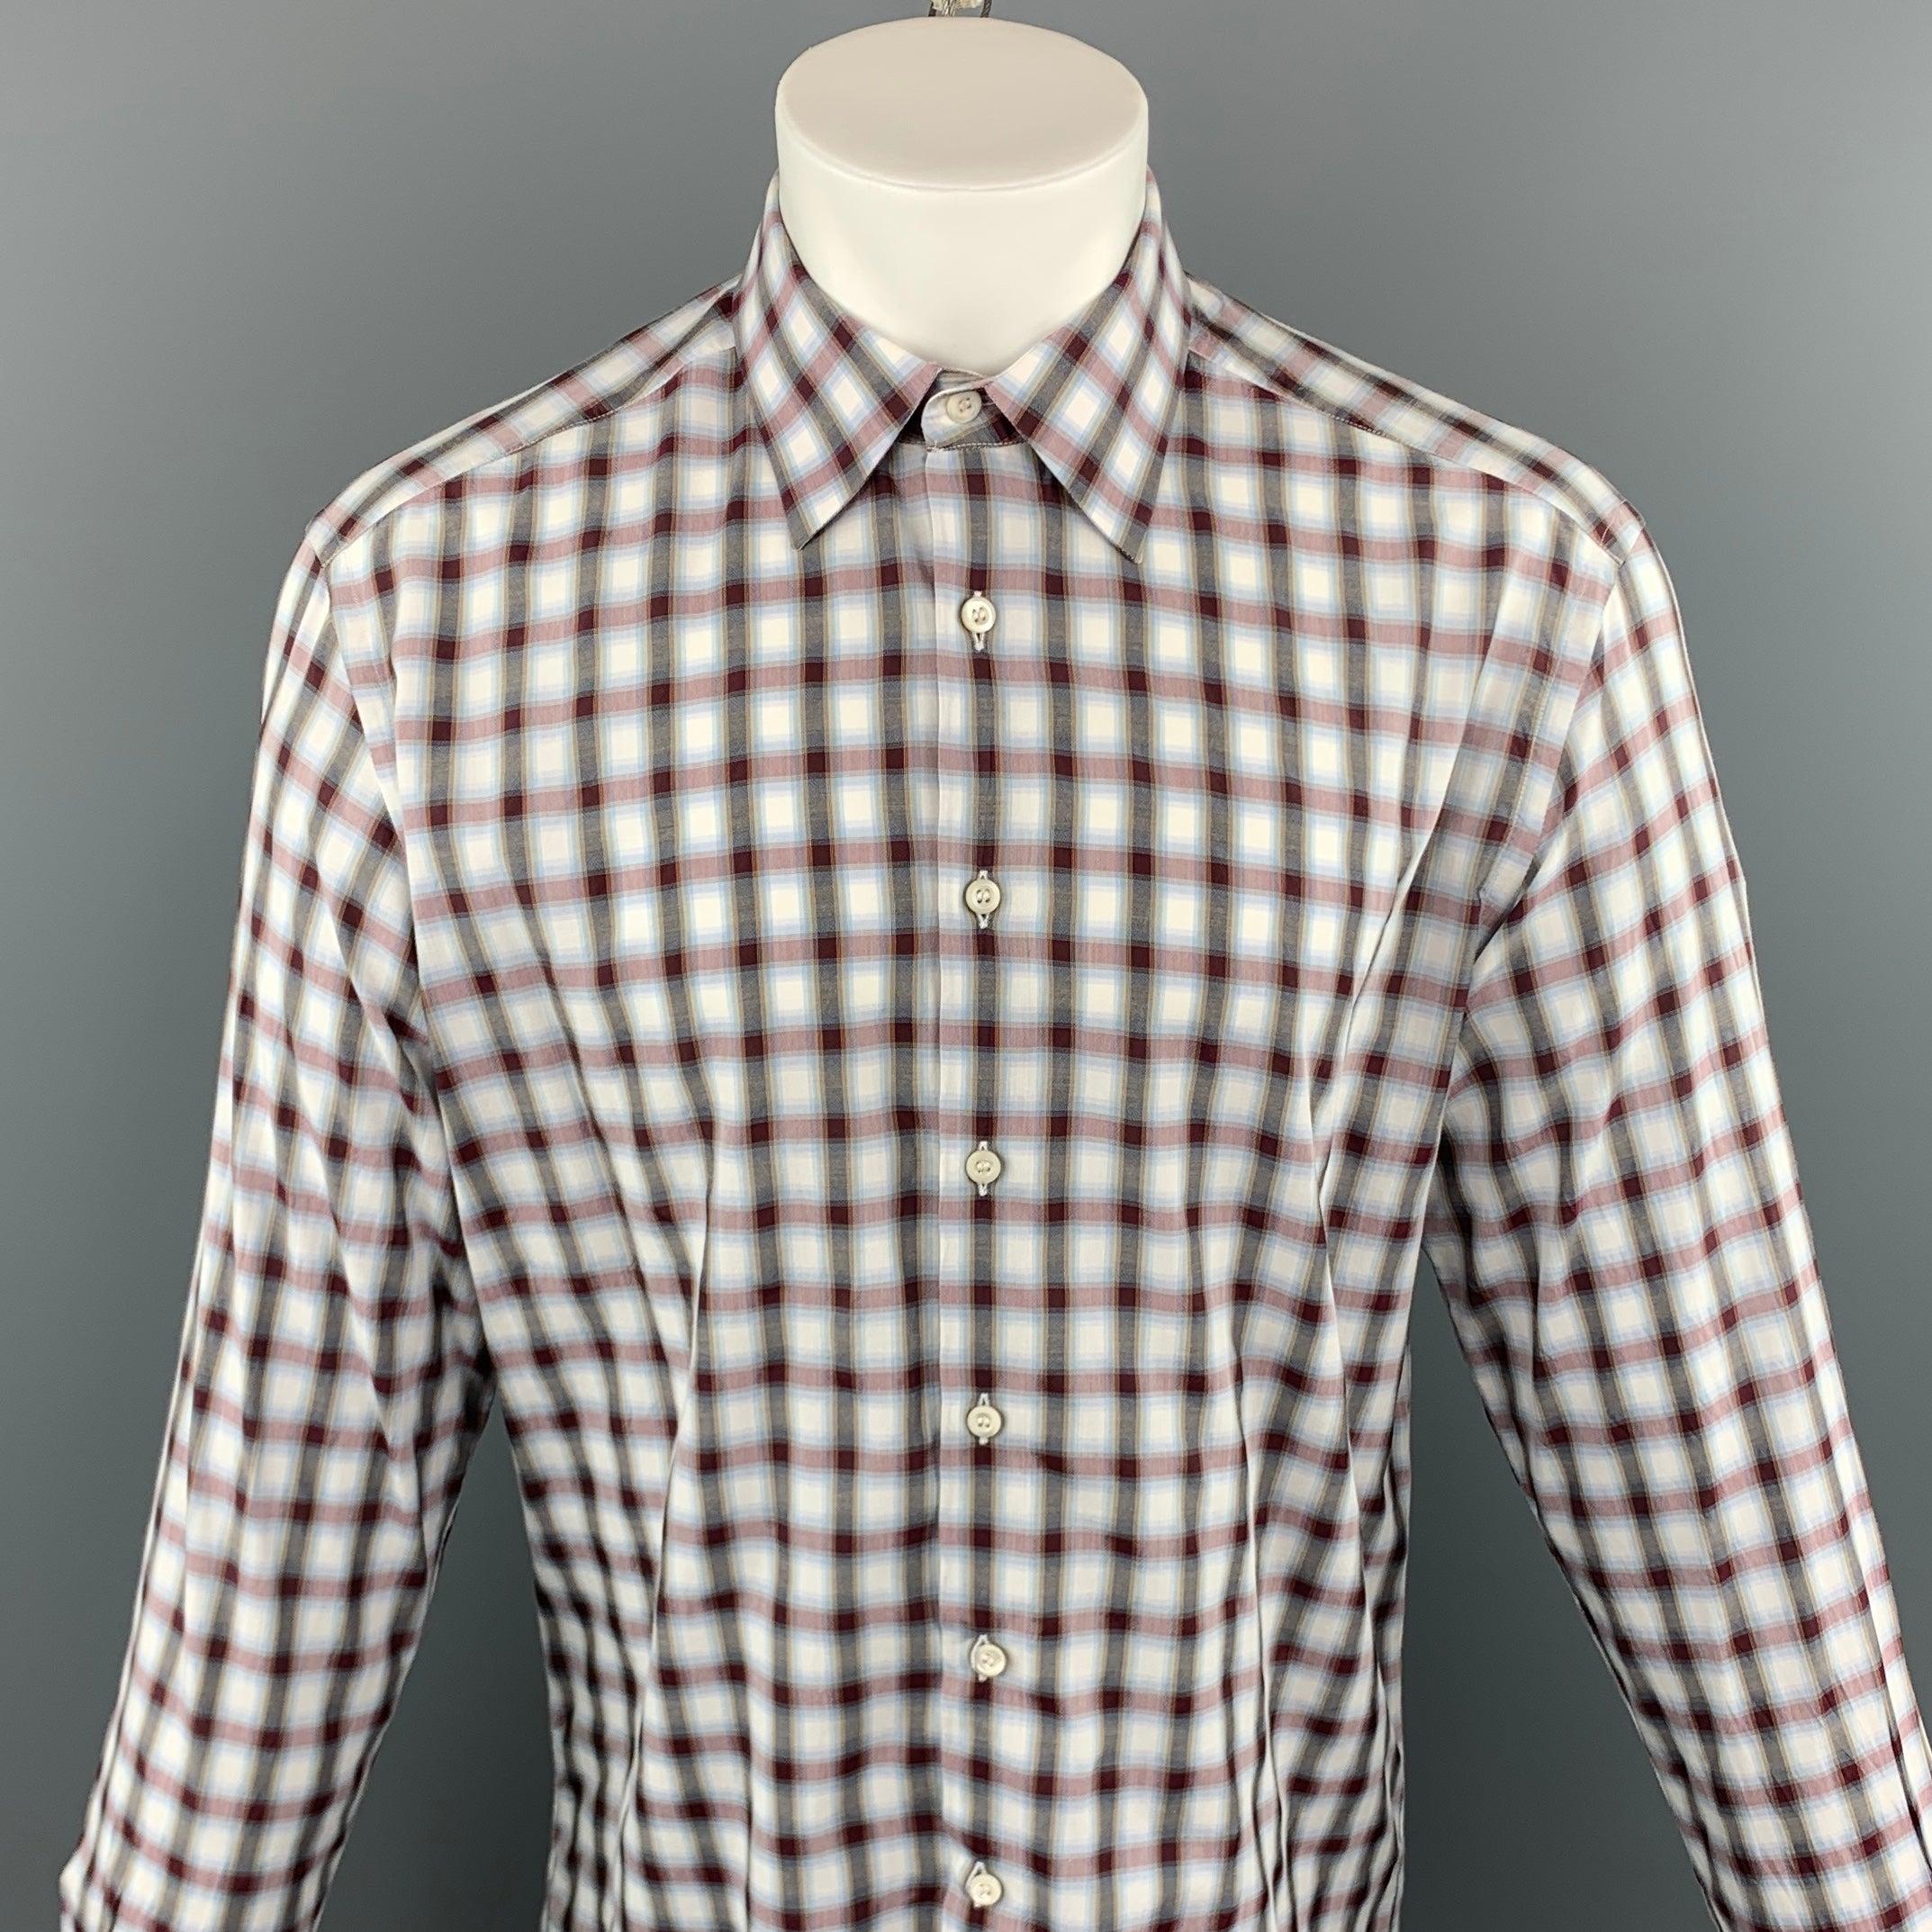 PRADA long sleeve shirt comes in a multi-color plaid cotton featuring a button up style and a spread color. Made in Italy.
Excellent Pre-Owned Condition.
 

Marked:   41
 

Measurements: 
  
l	Shoulder: 18 inches  
l	Chest: 45 inches  
l	Sleeve: 26